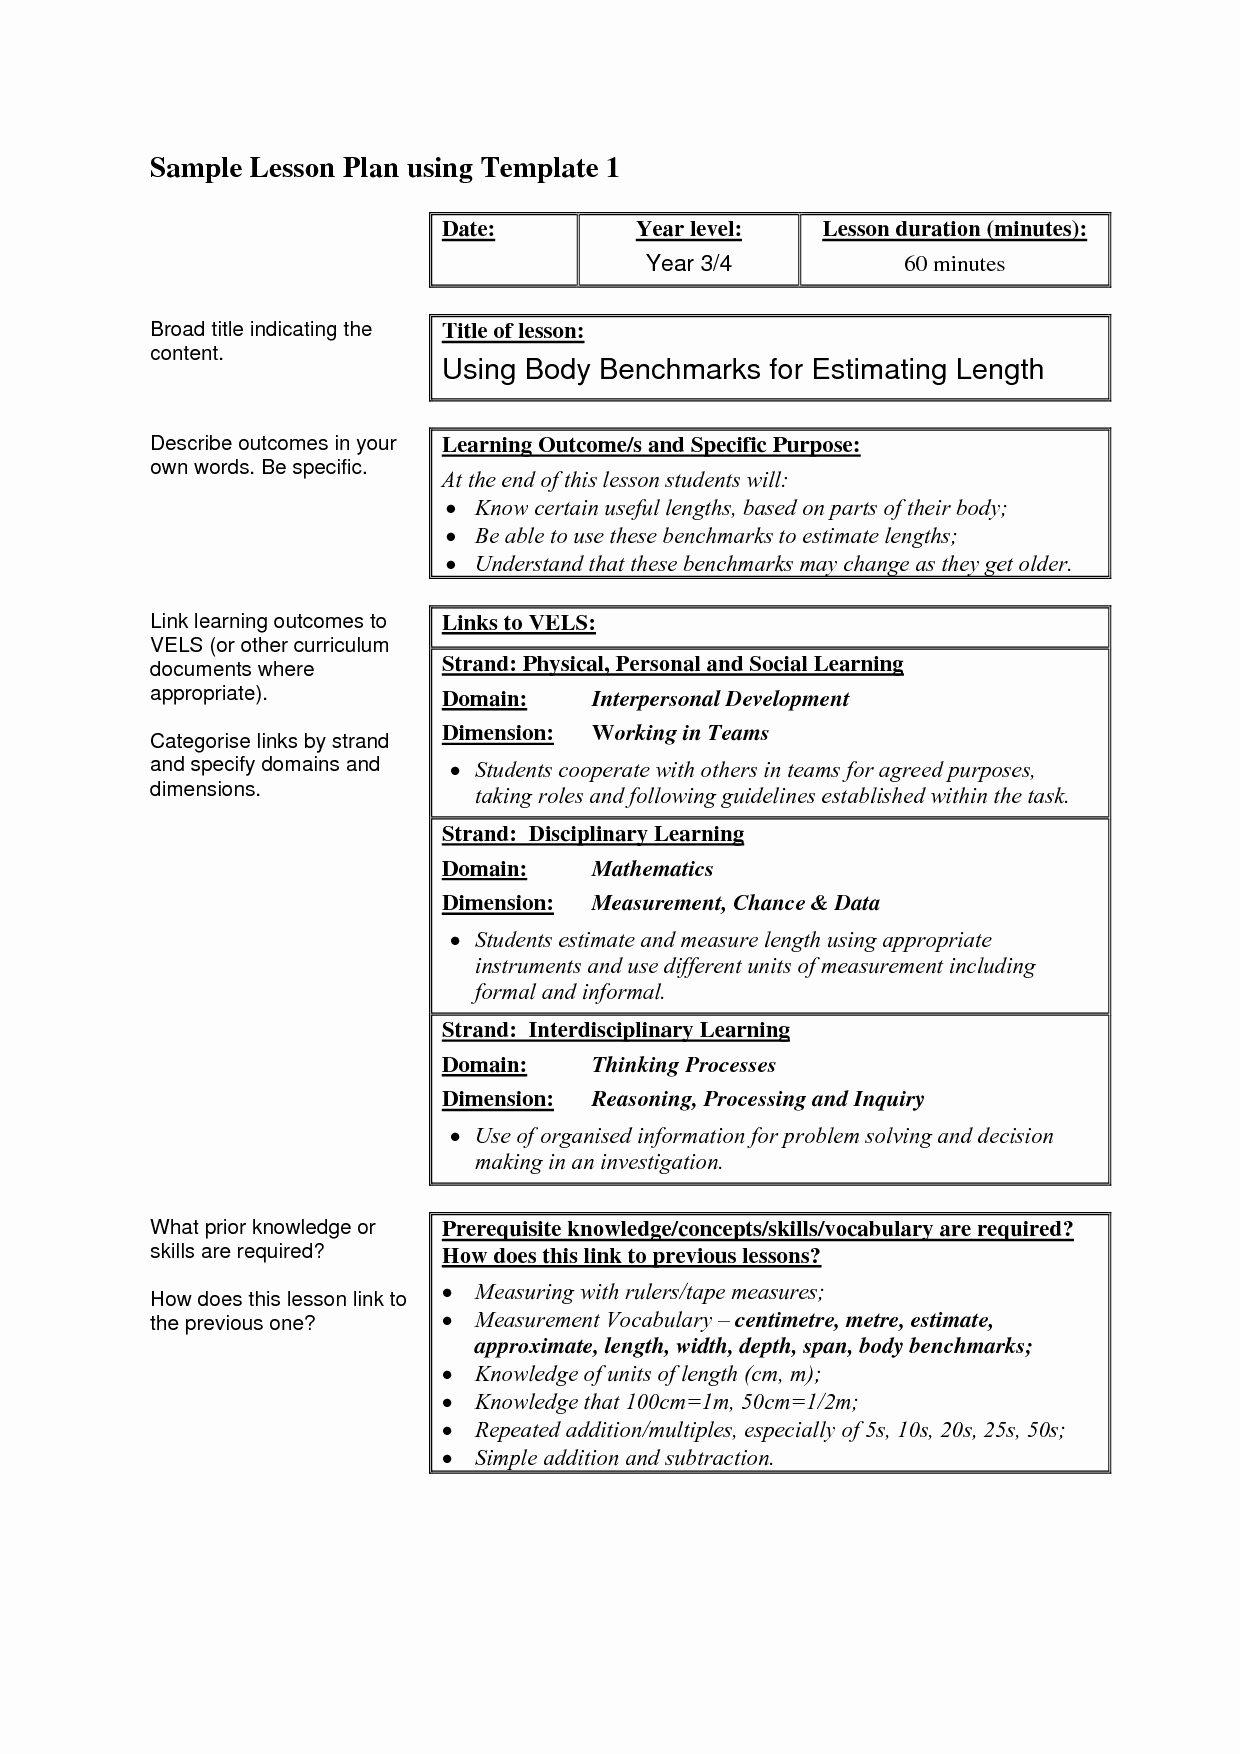 Lesson Plan Outline Template Awesome Sample Lesson Plan format Wow Image Results